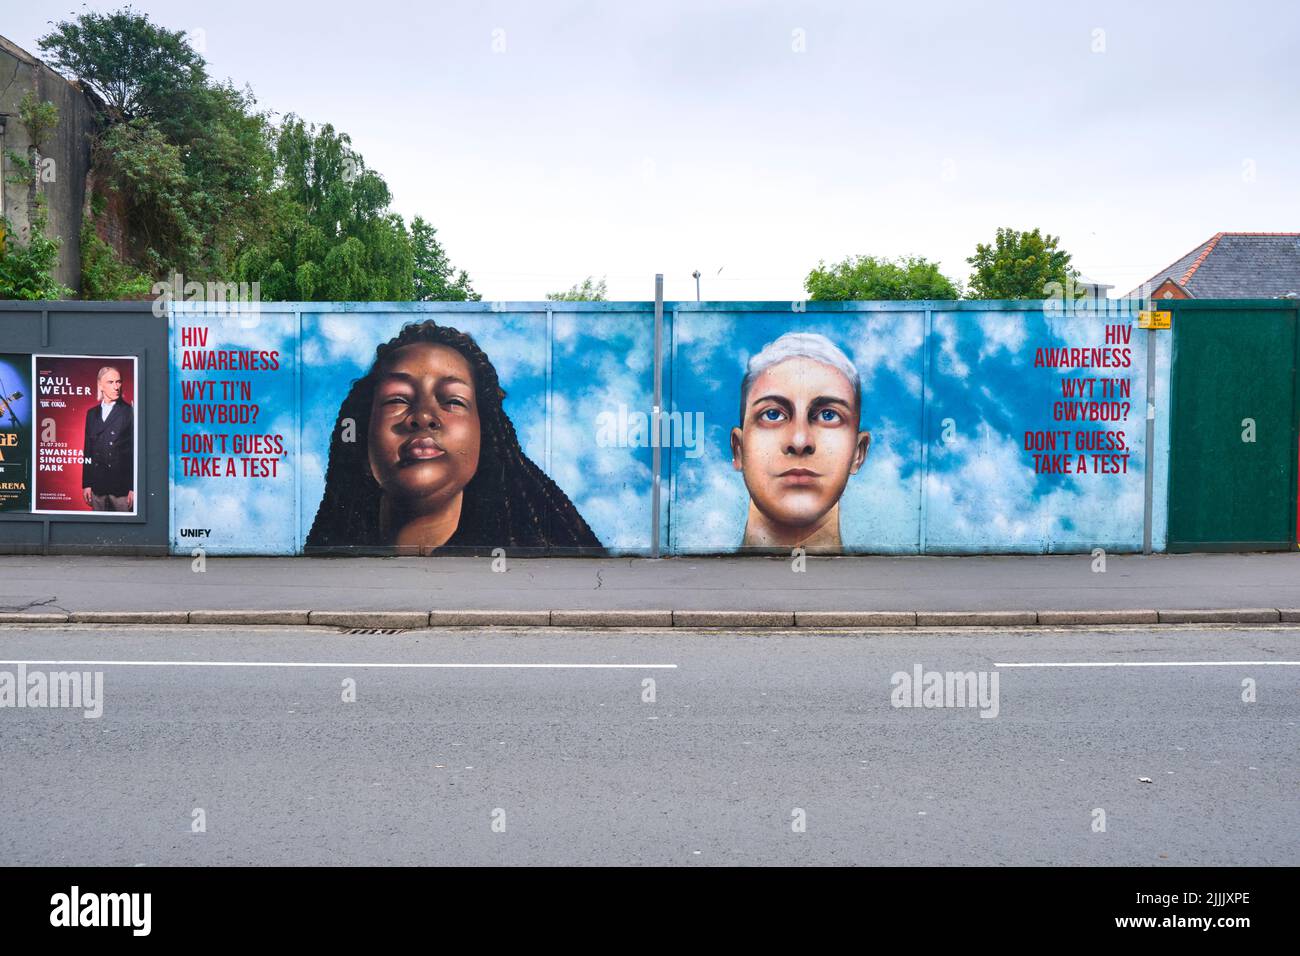 A painted mural, featuring portraits of people, urging citizens to get tested for HIV. In Cardiff, Wales, United Kingdom. Stock Photo